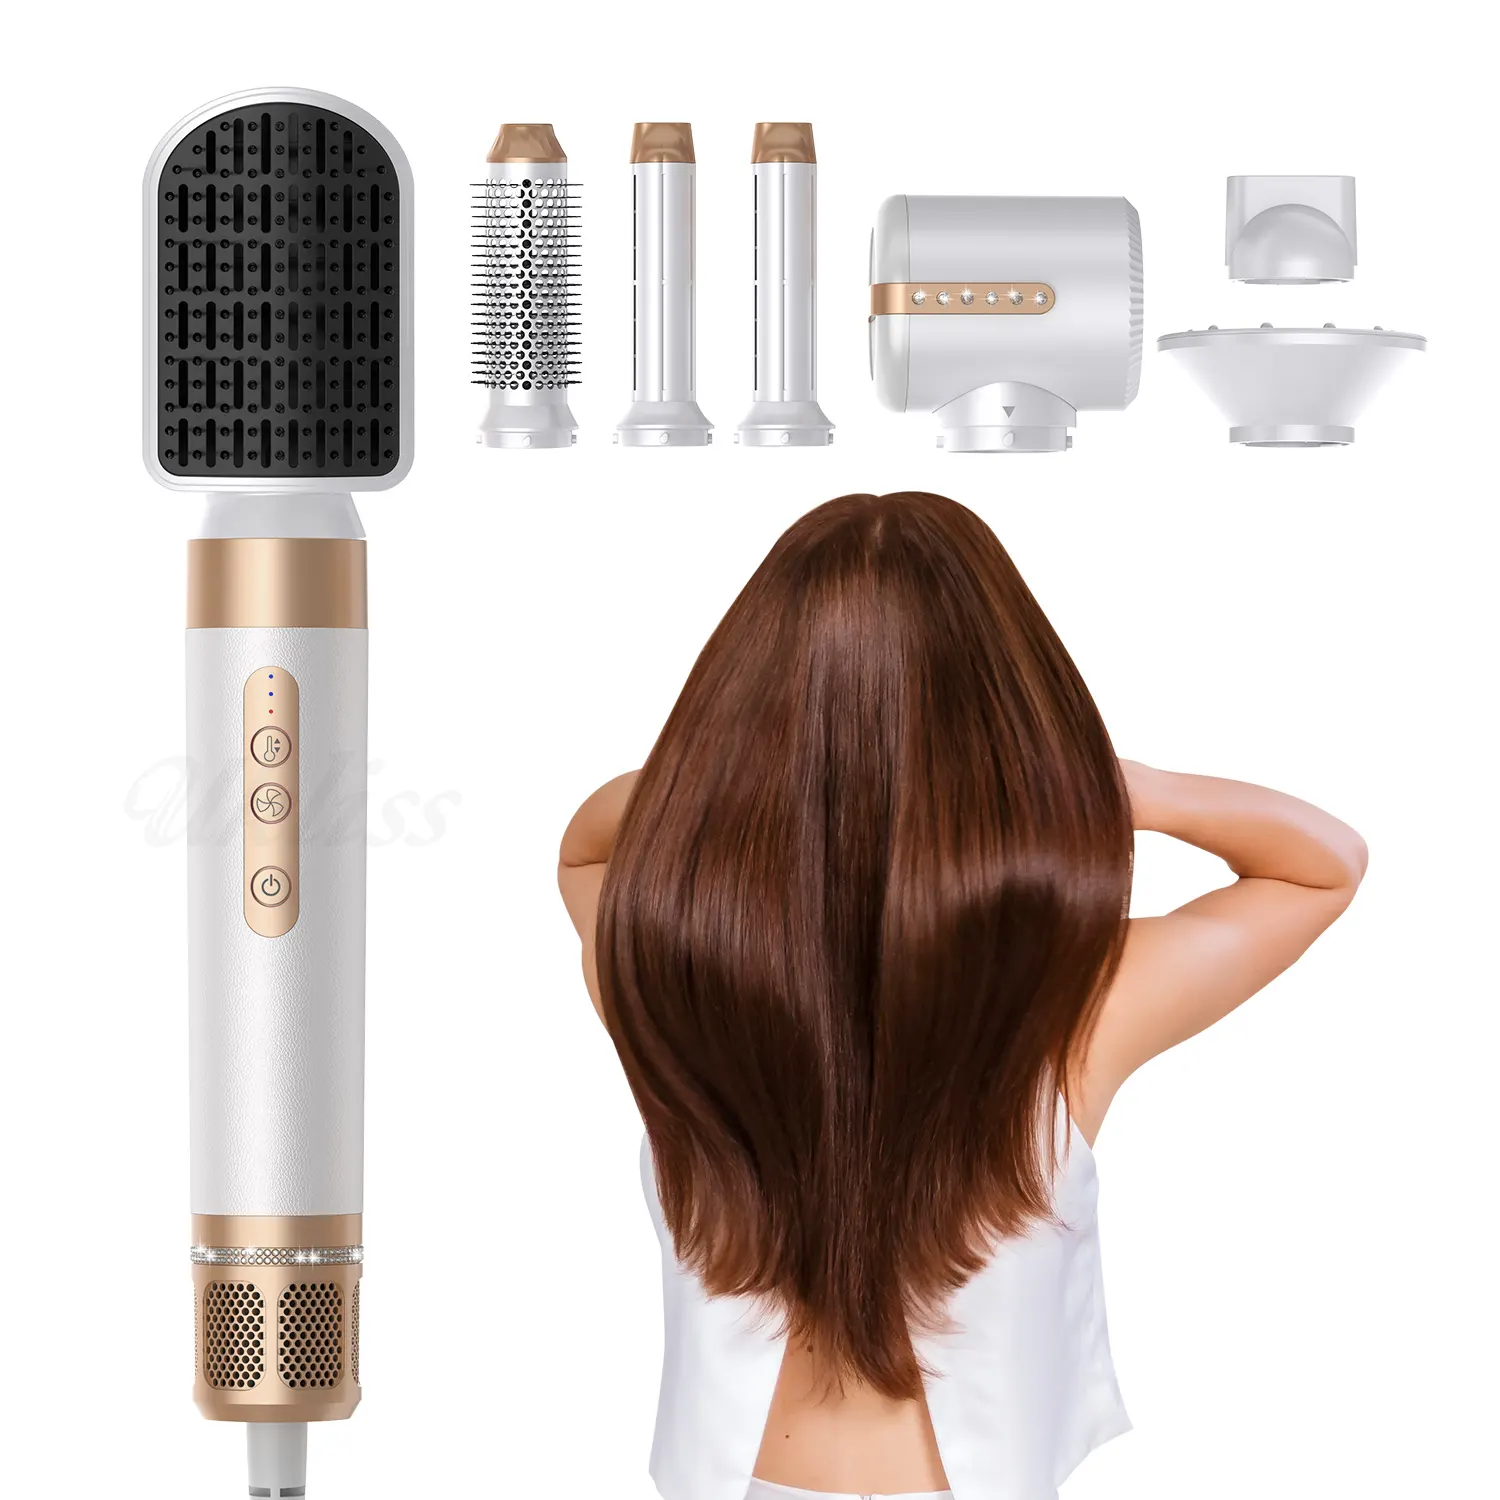 Best Quality 5 In 1 Hair Dryer Straightening Curling Styling Hot Air Brush Multiple Hair Types and Styles Hair Dryer